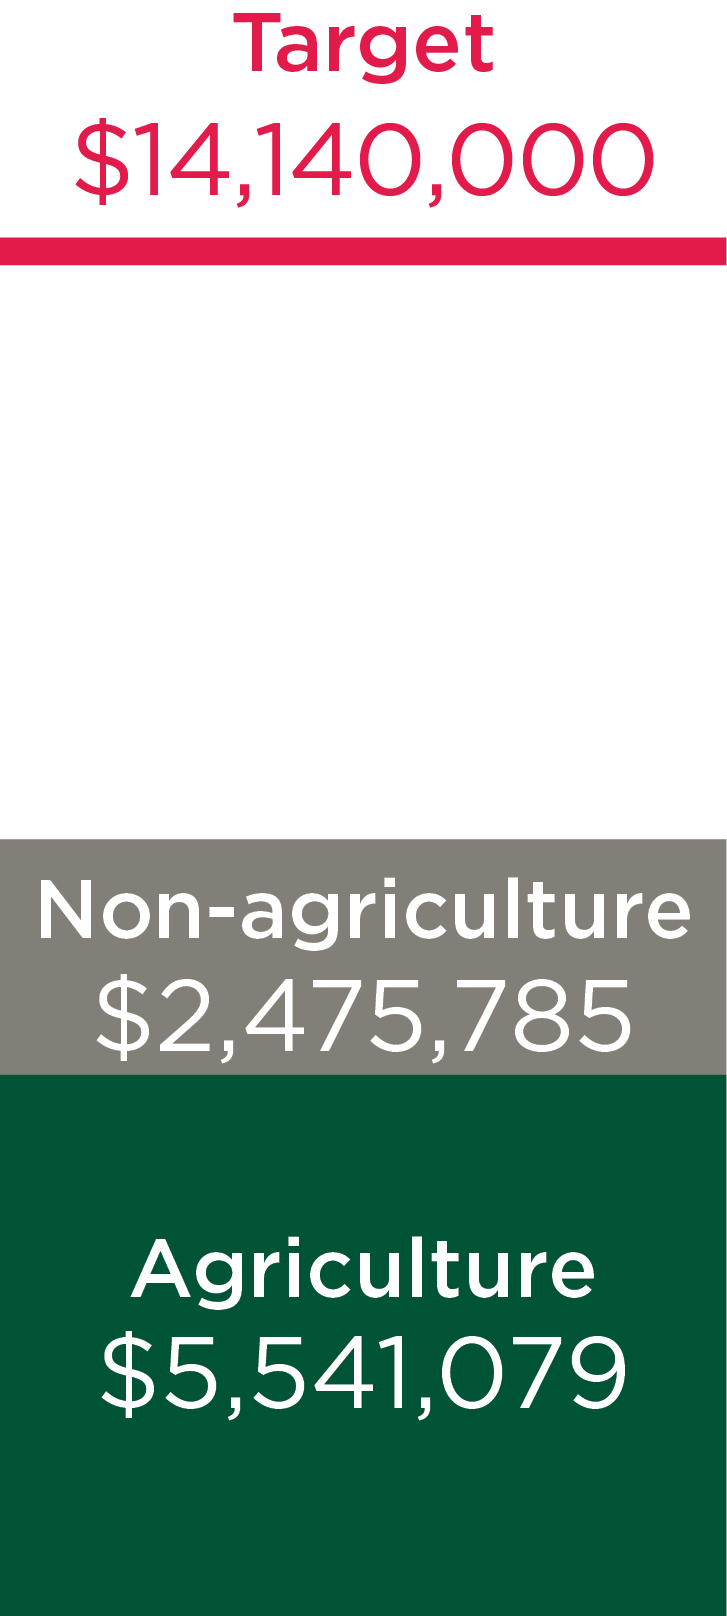 agriculture lending of $5.5M and non-agriculture lending of $2.5M did not reach target of $14.1M